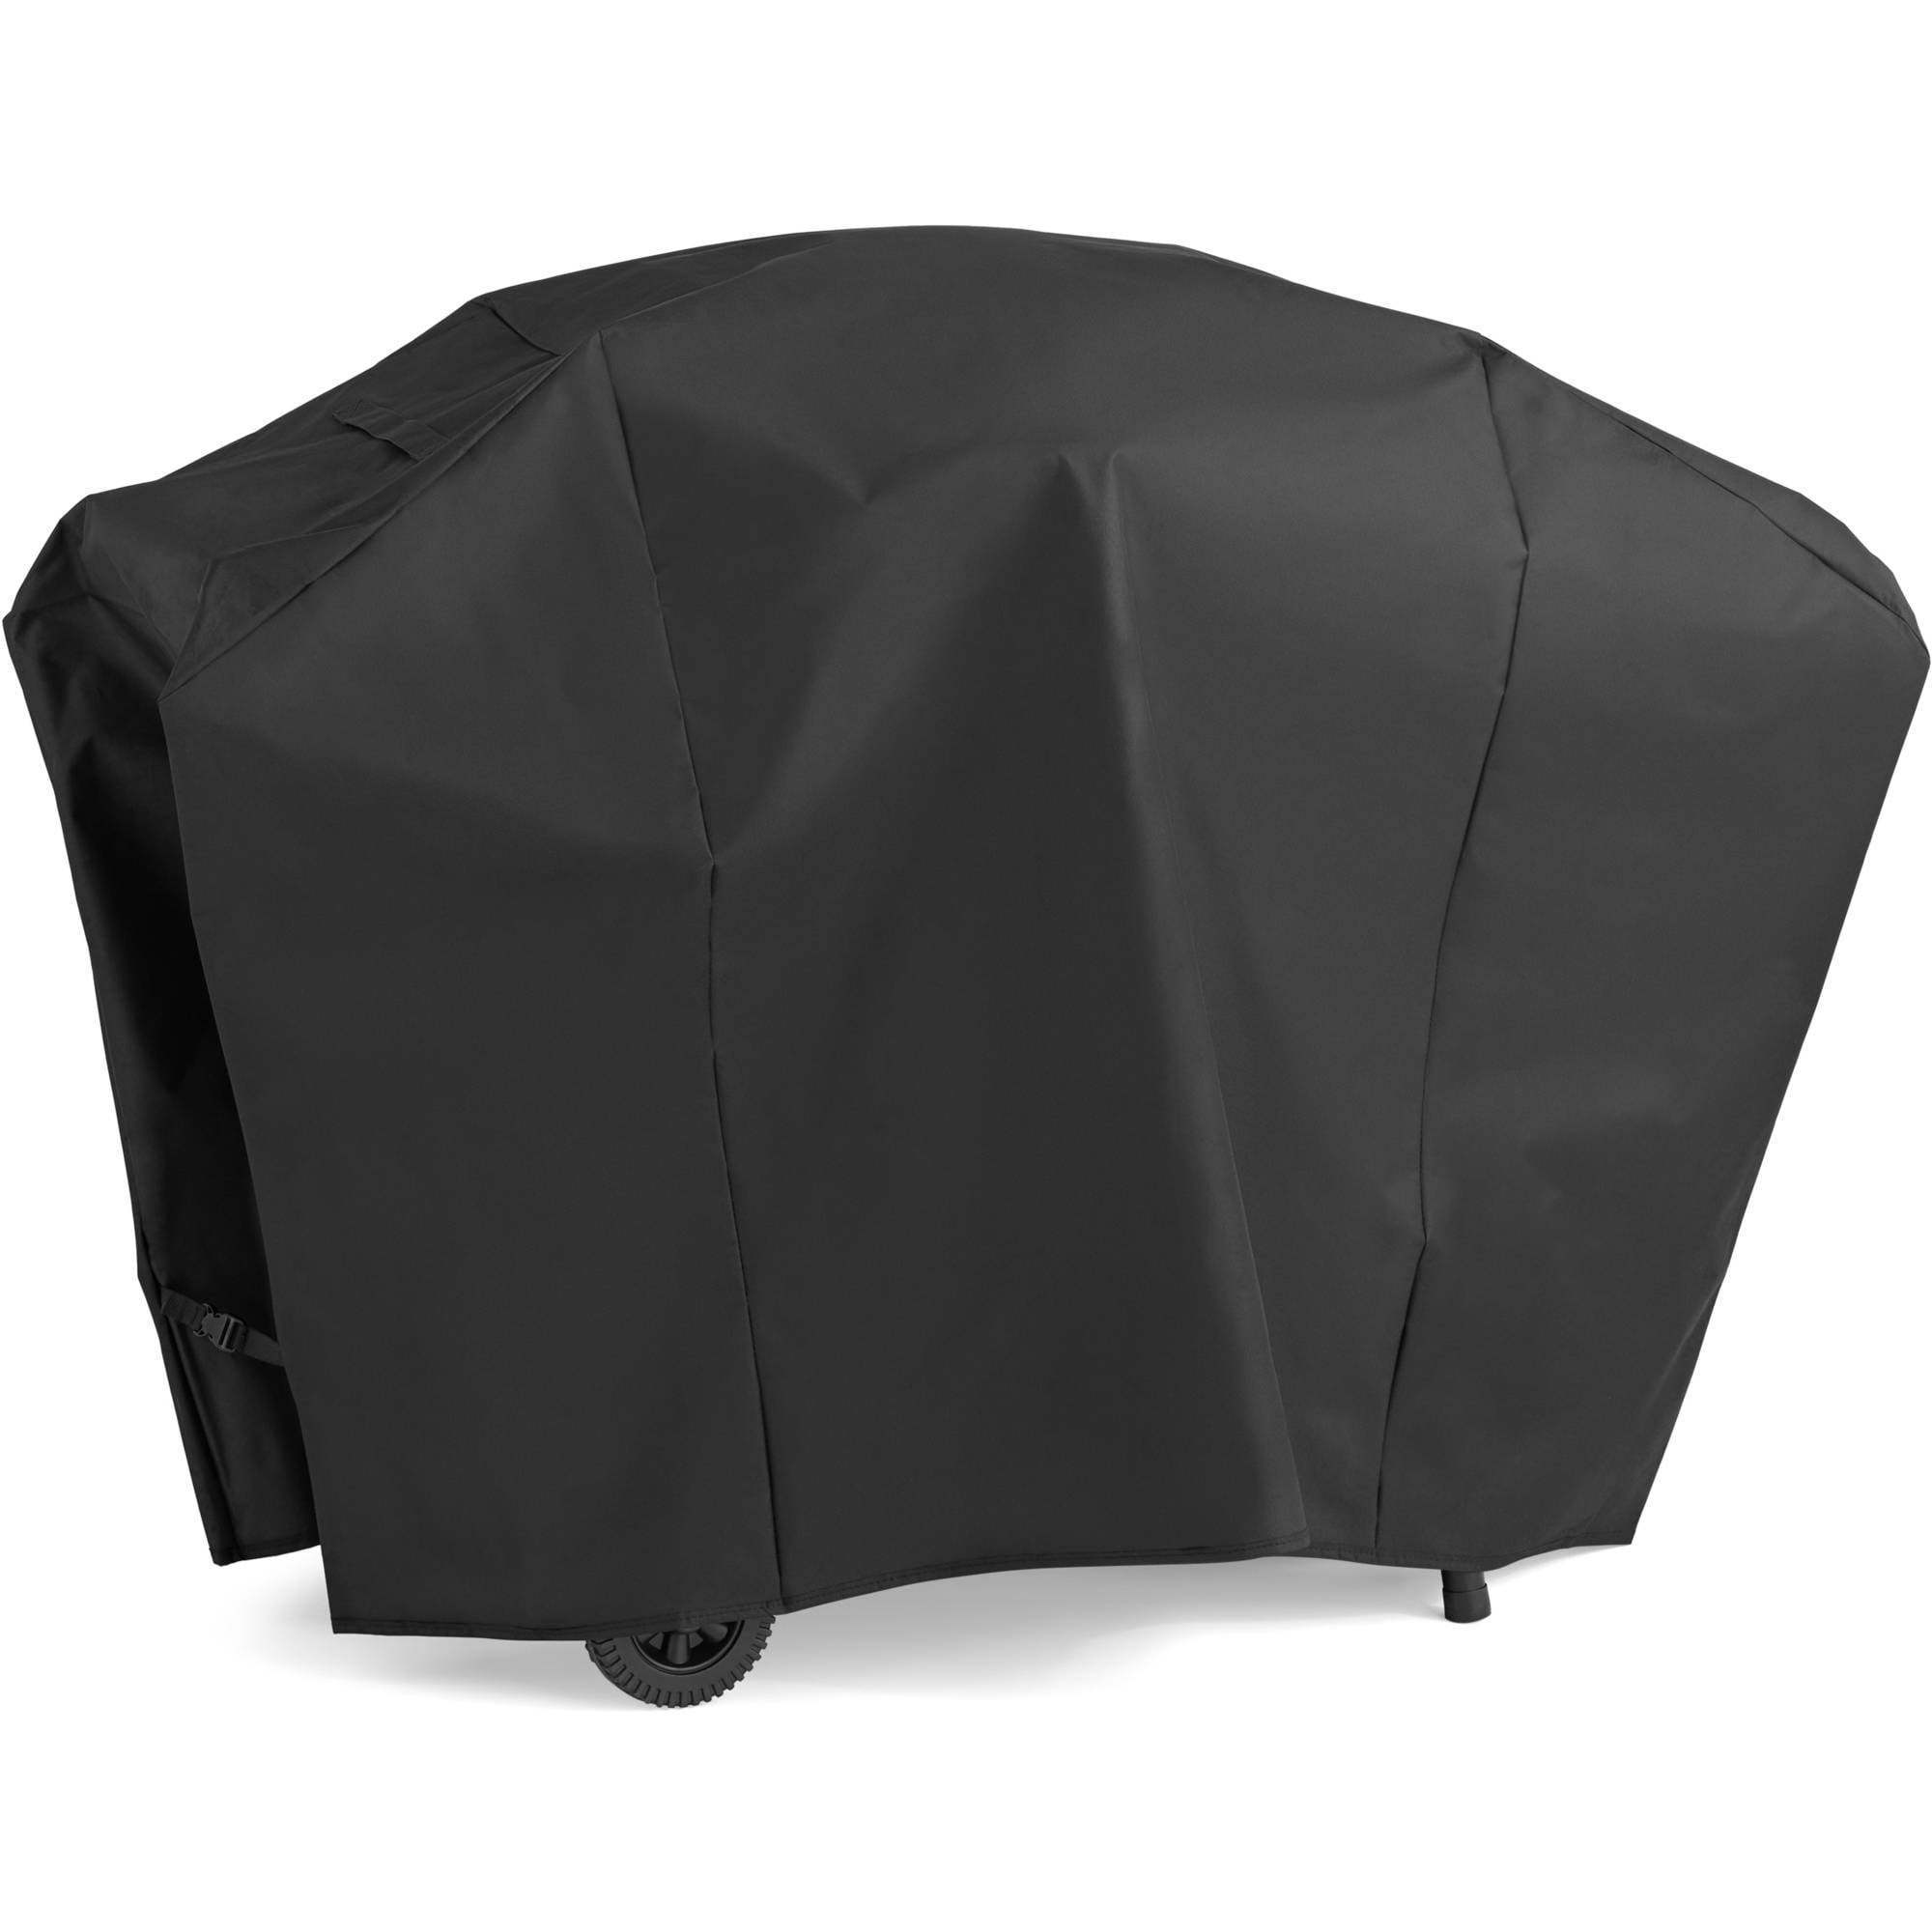 Expert Grill Heavy Duty 60Inch Grill Cover